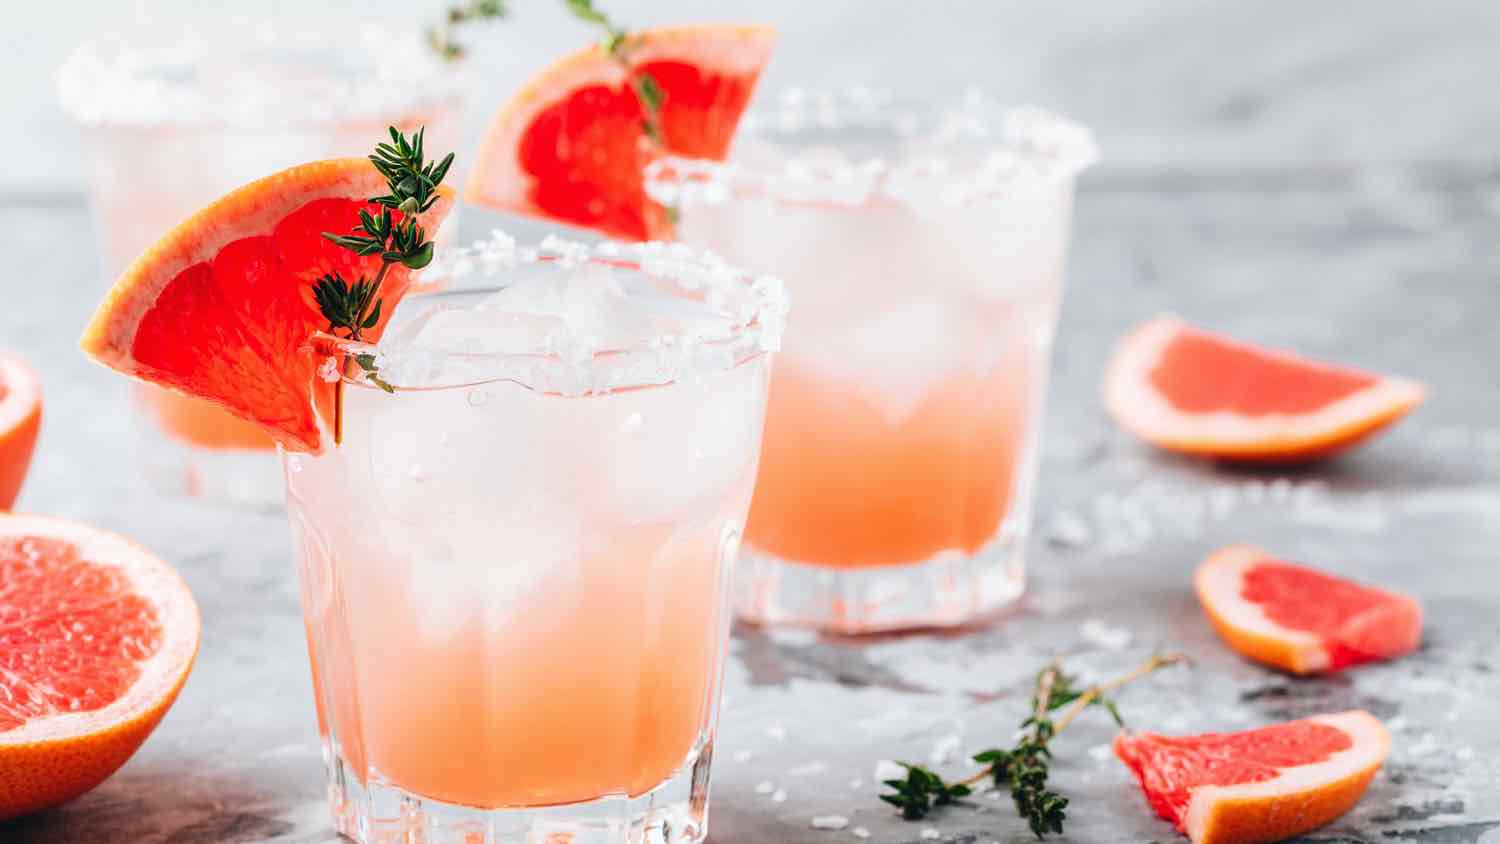 It’s National Margarita Day: Here’s What To Make To Celebrate